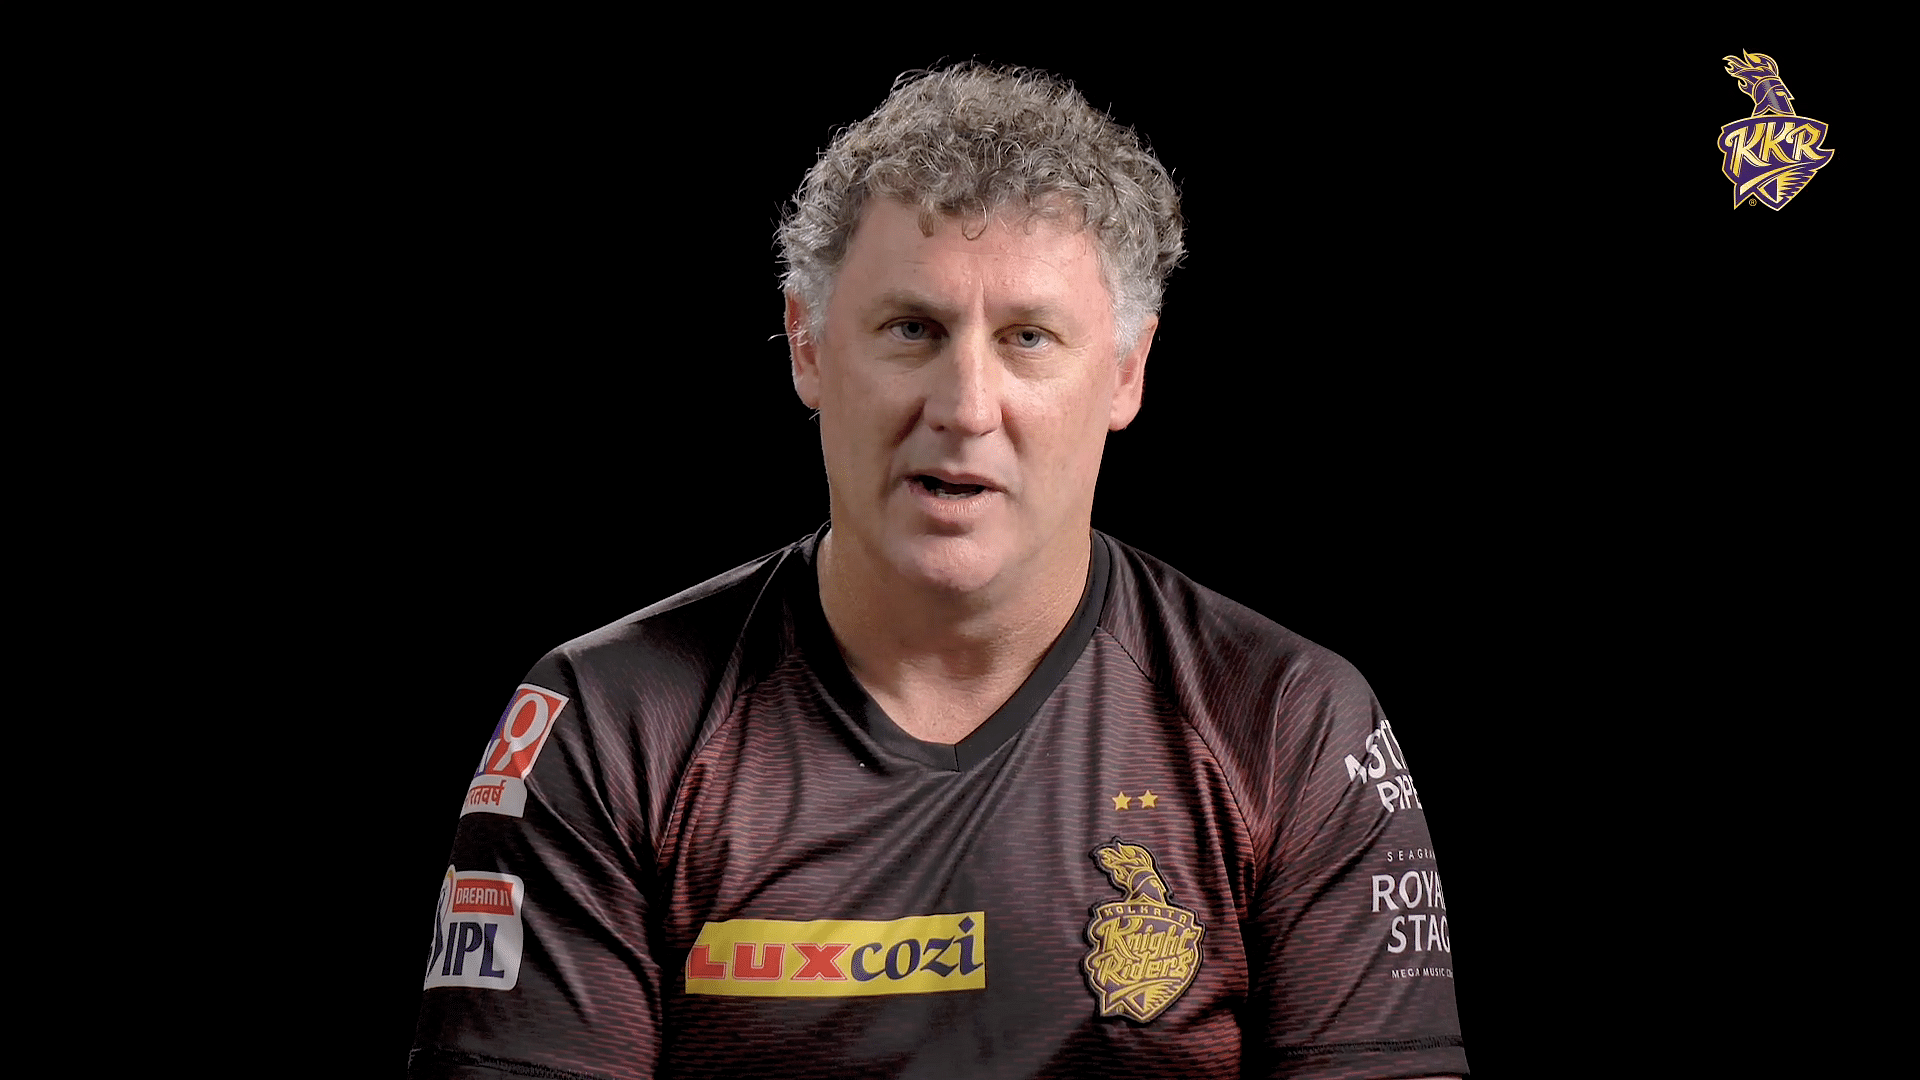 David Hussey talks about the different players in the KKR outfit this season.